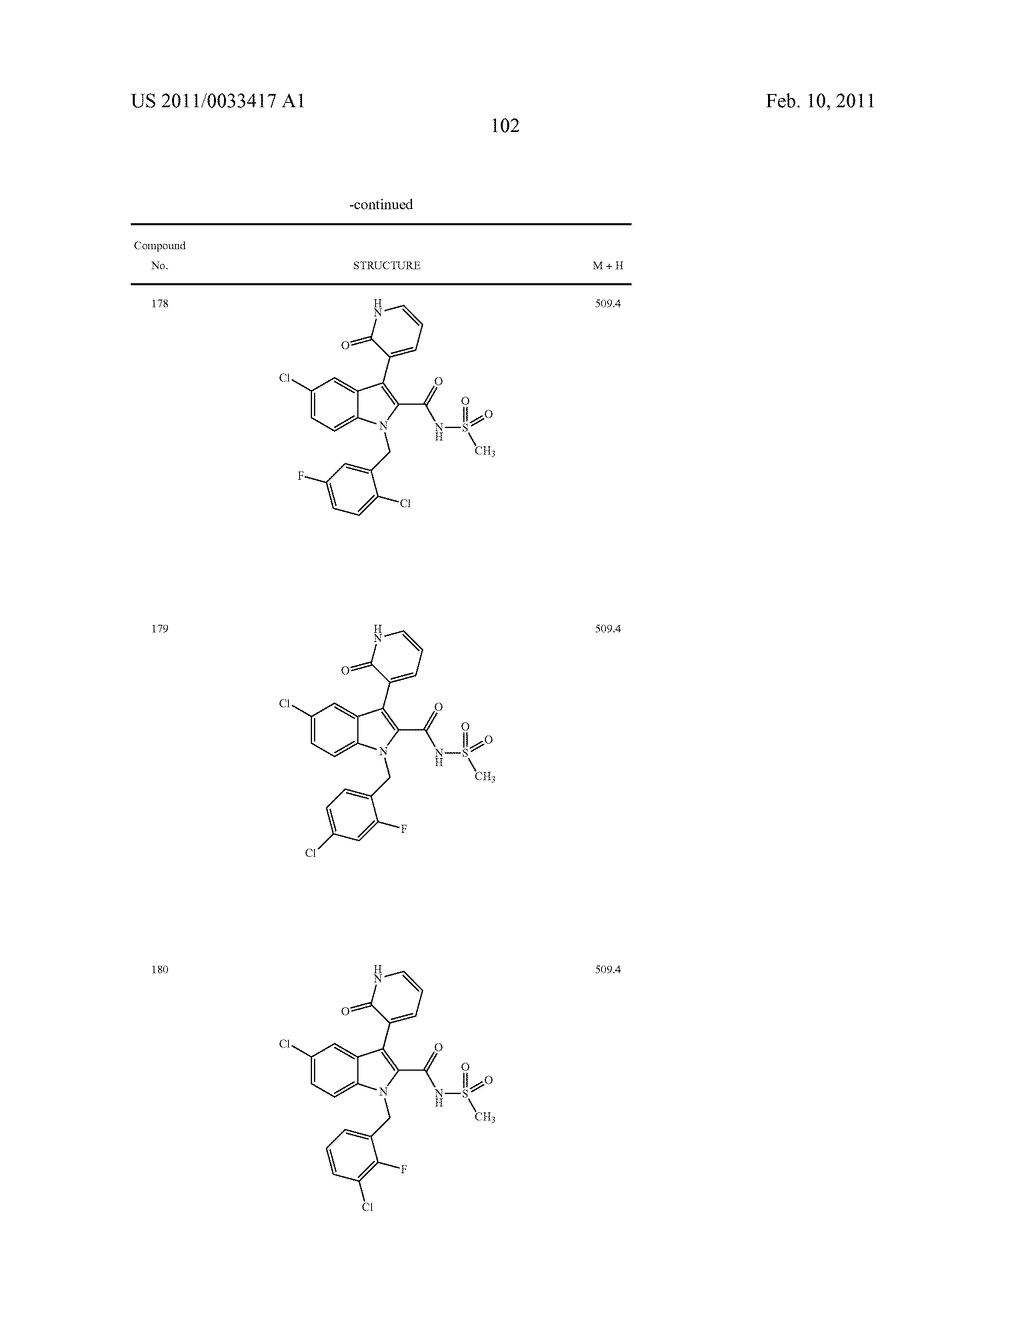 2,3-SUBSTITUTED INDOLE DERIVATIVES FOR TREATING VIRAL INFECTIONS - diagram, schematic, and image 103